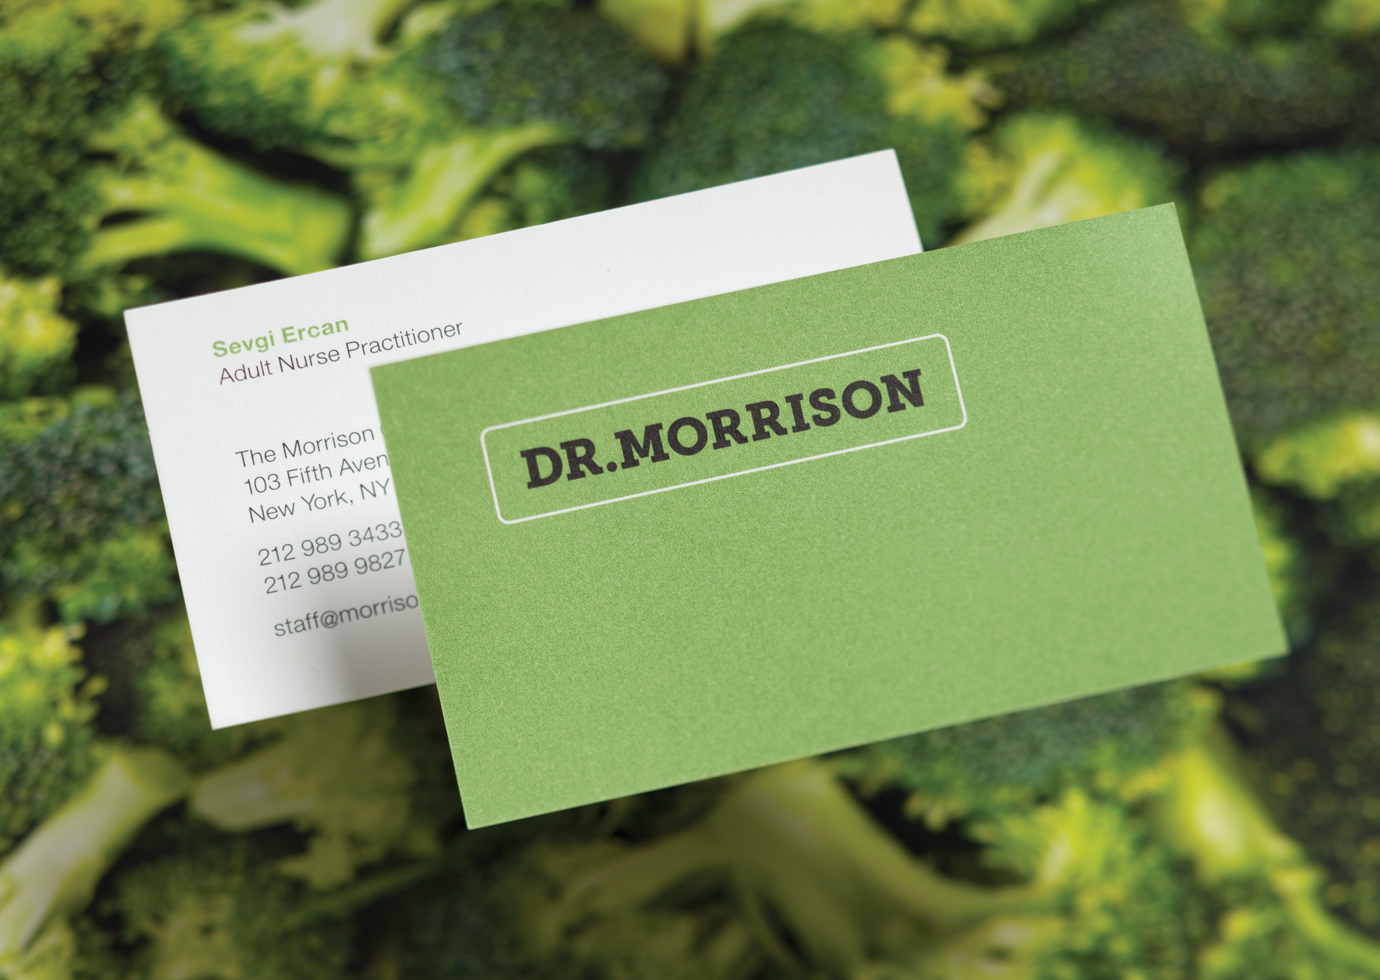 Both sides of a Dr. Morrison business card with the company logotype against blurred image of broccoli florets.